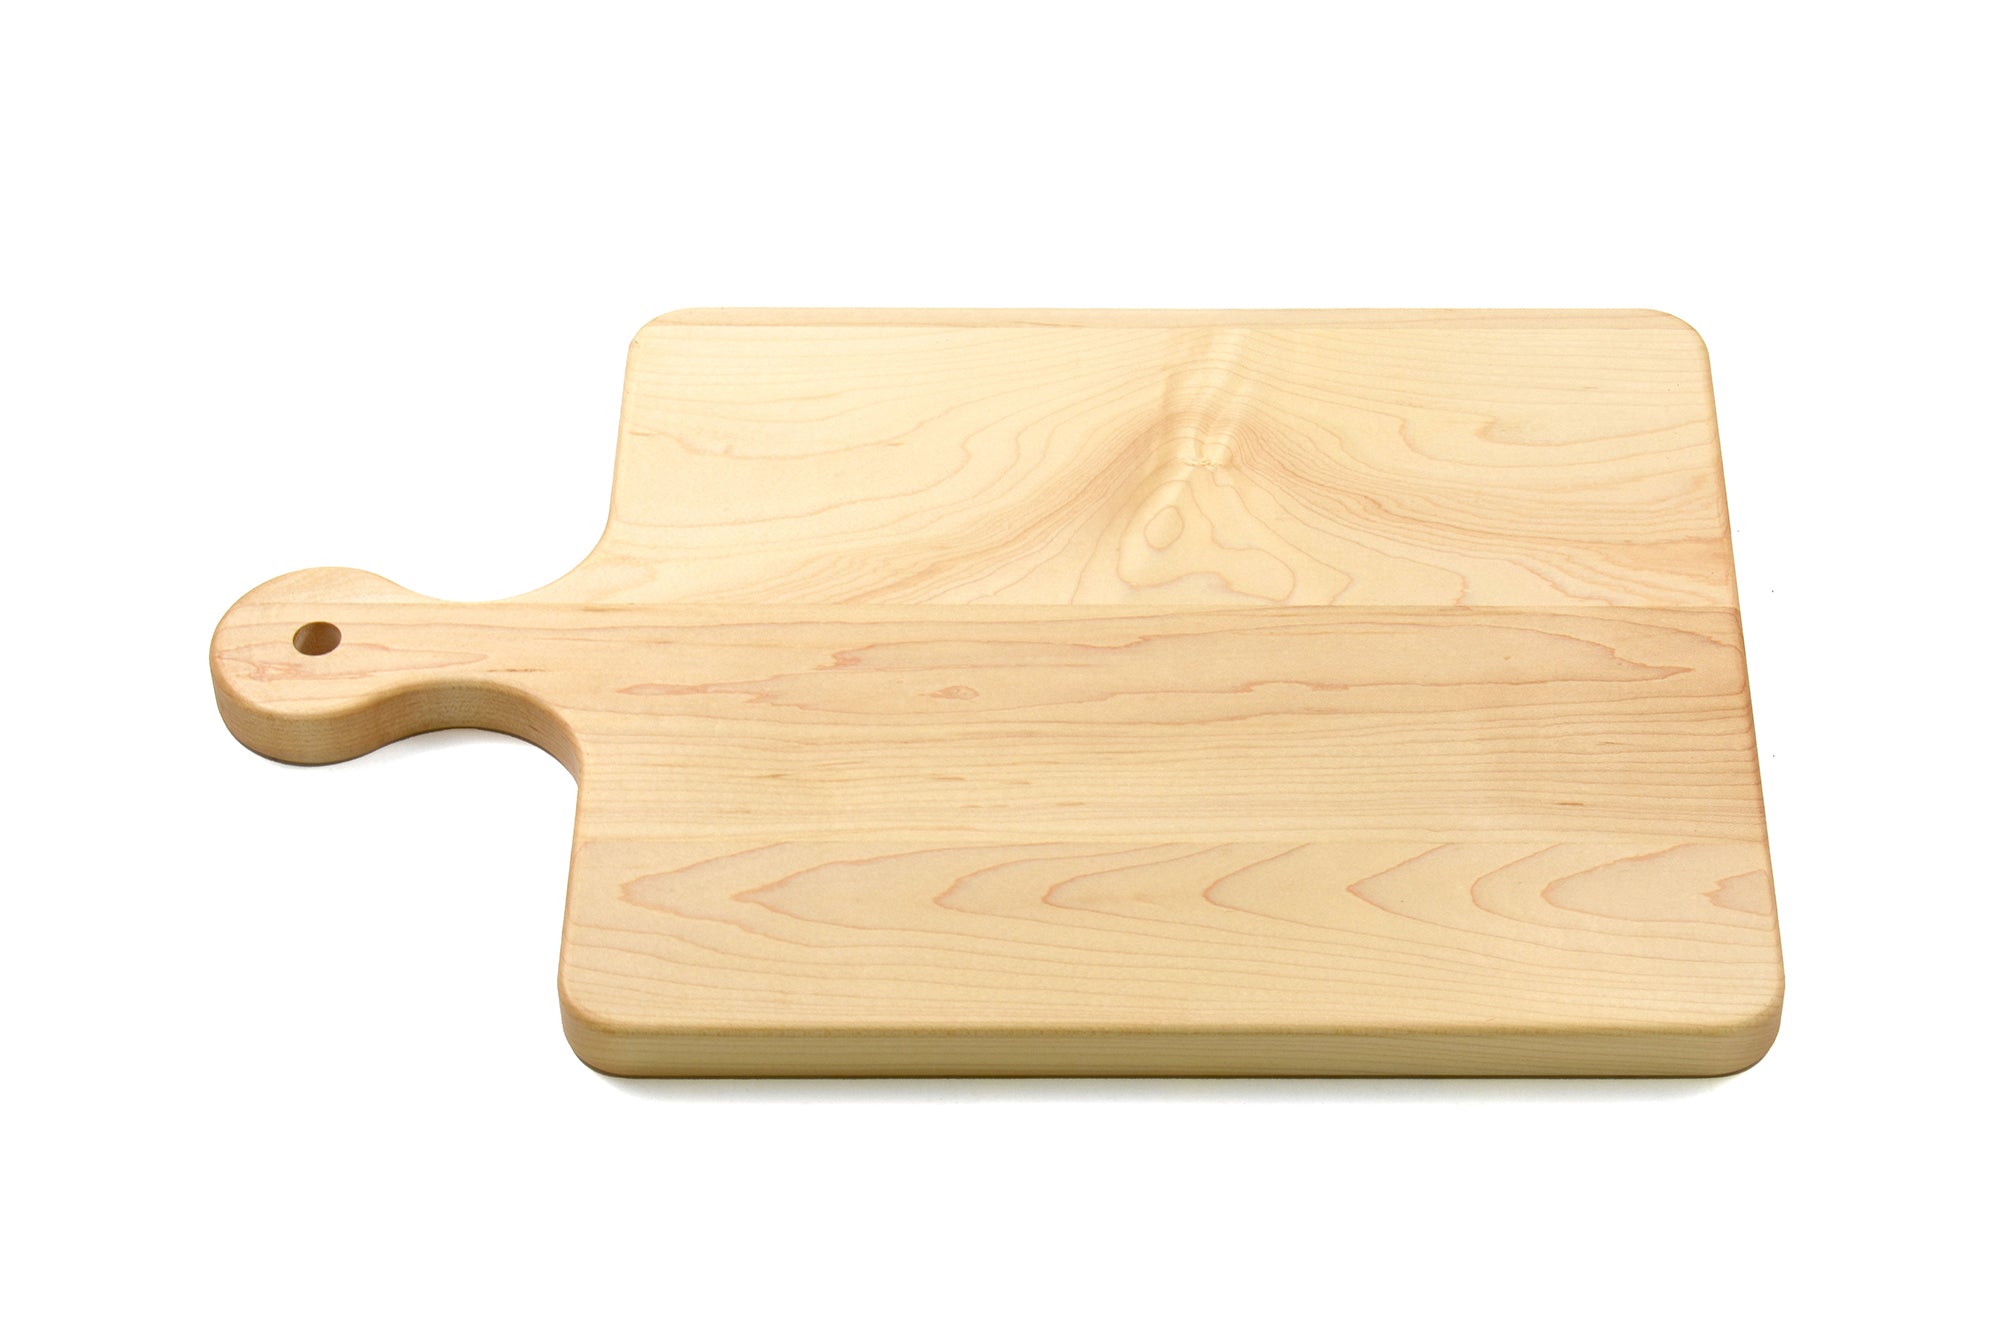 Rounded Handle Maple Cutting Board